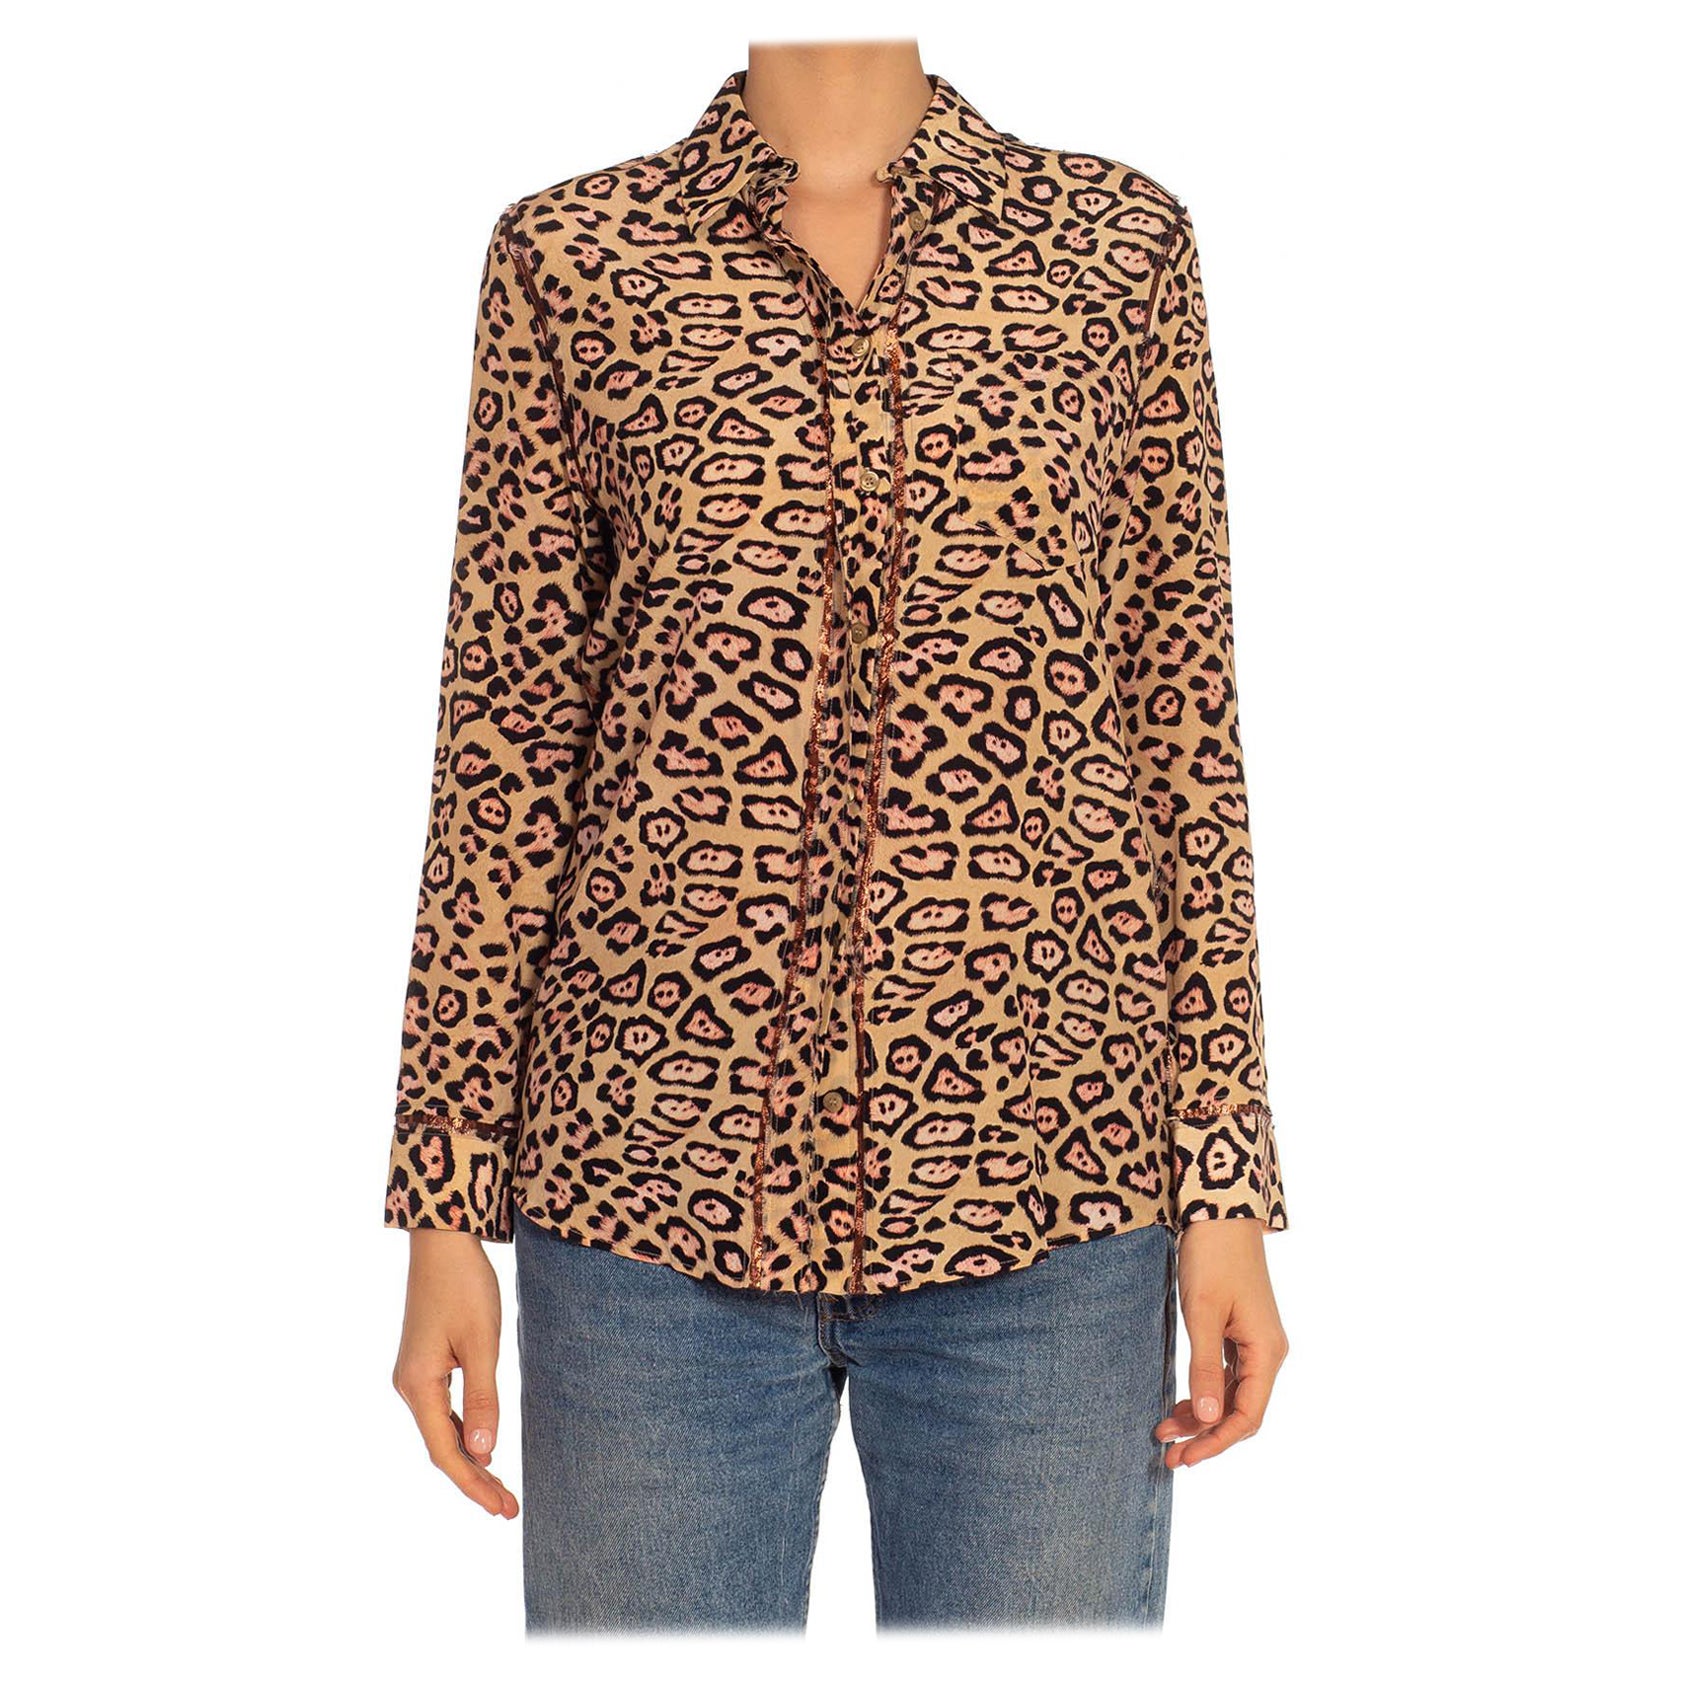 2010S GIVENCHY Leopard Print Tan & Brown Silk With Metallic Trimmings Shirt For Sale